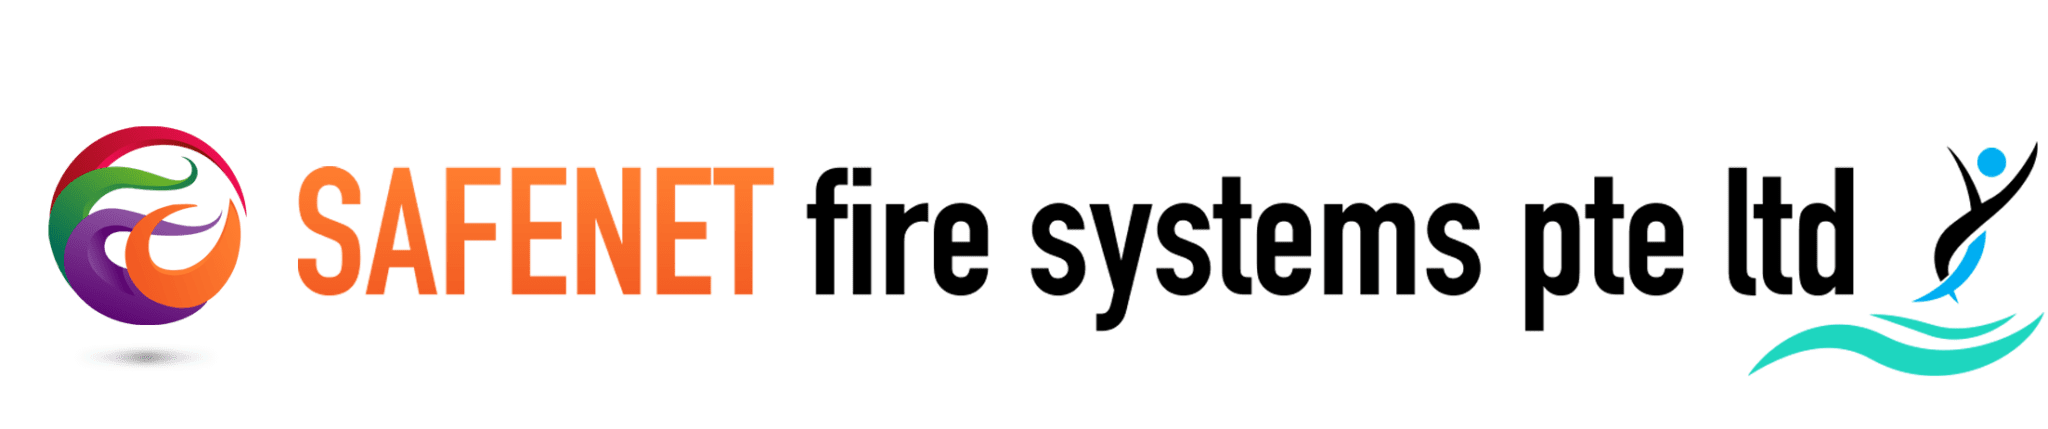 Fire Protection System In Singapore